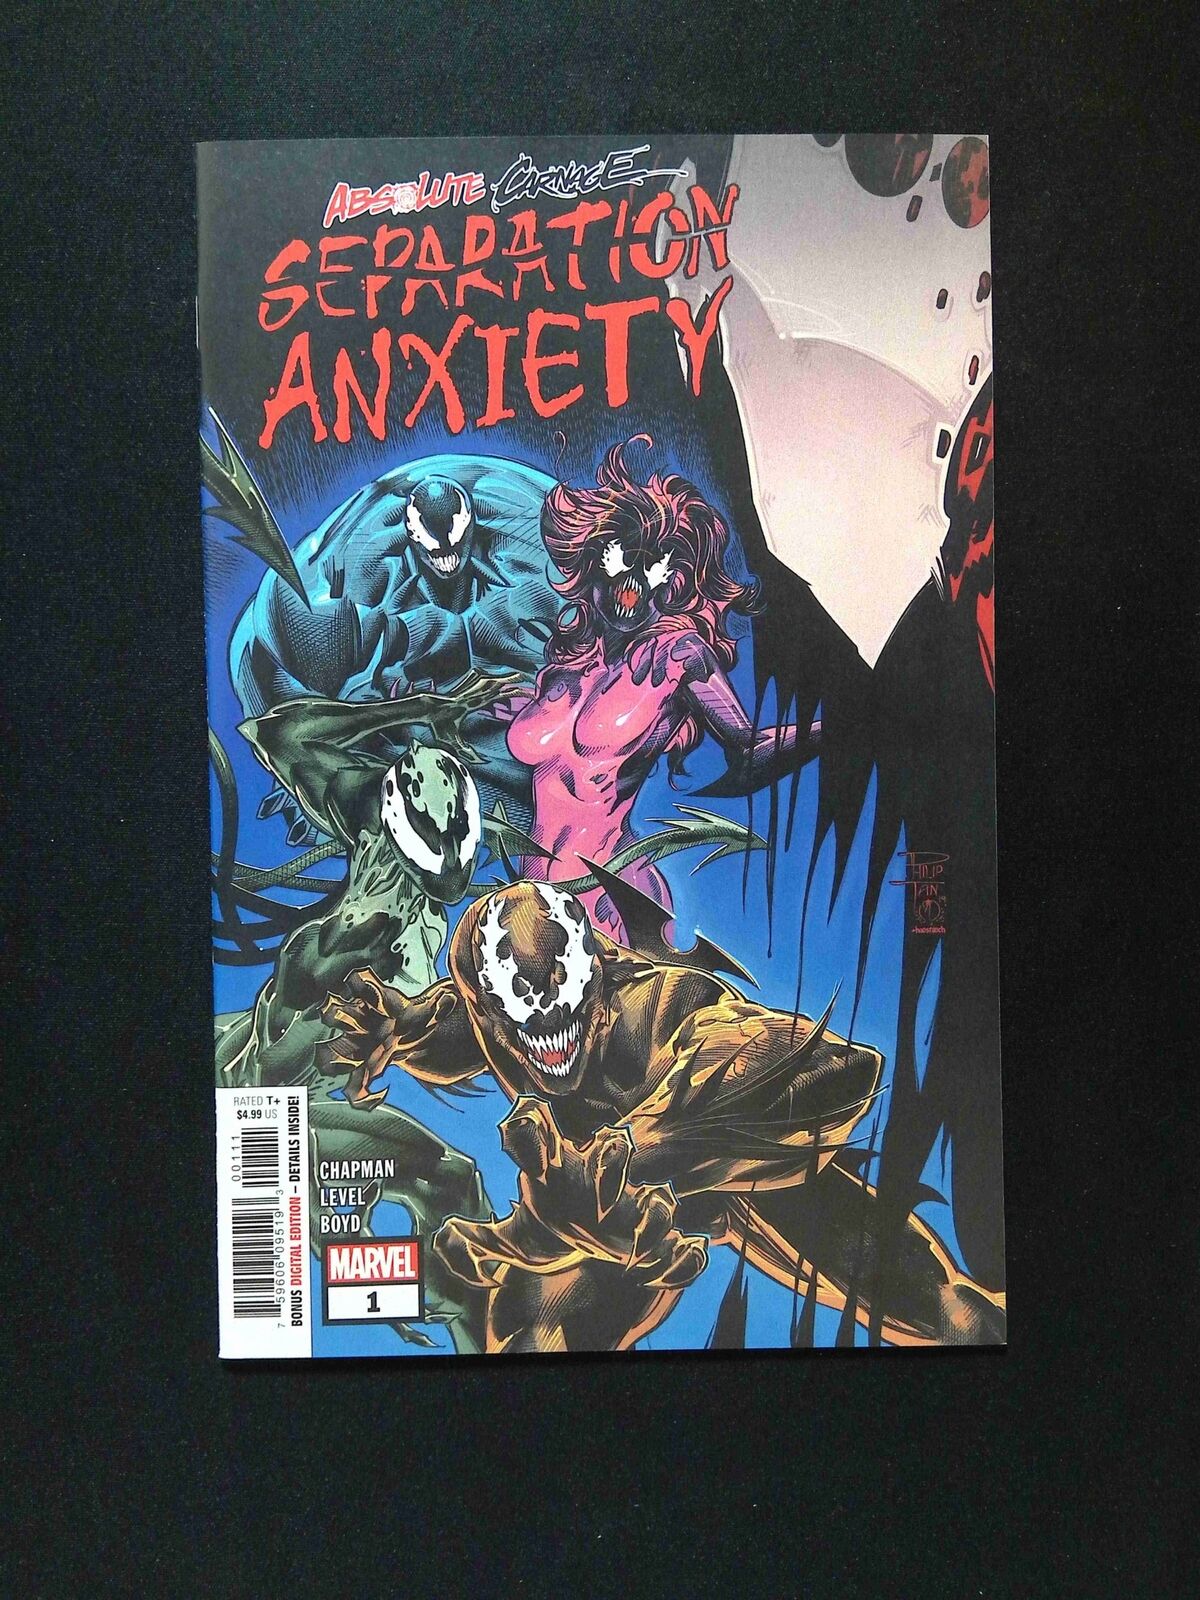 Absolute Crnage Separation Anxiety #1  MARVEL Comics 2018 NM